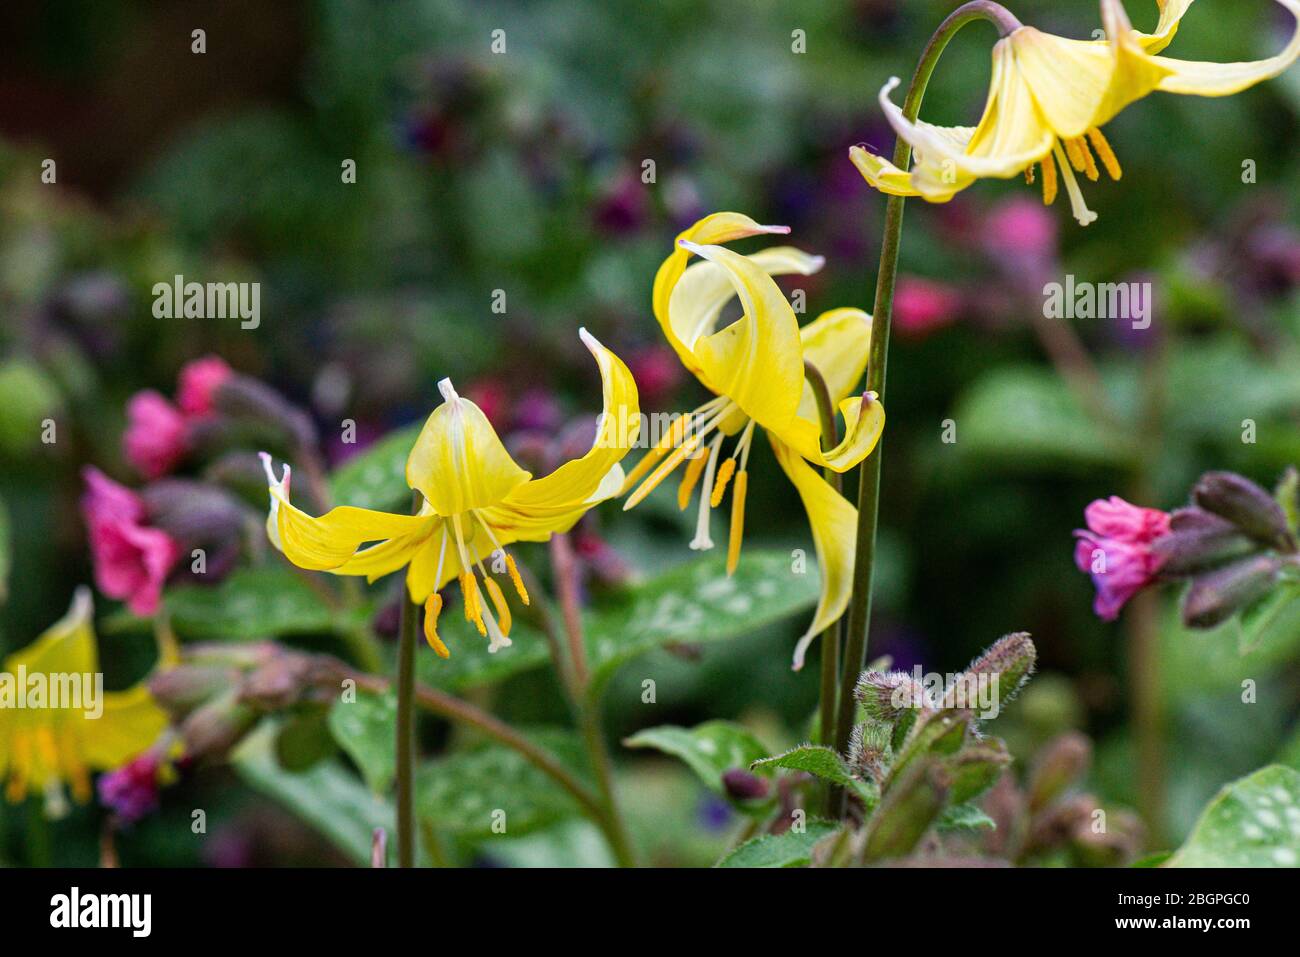 The flowers of a dog's tooth violet 'Pagoda' (Erythronium 'Pagoda') Stock Photo